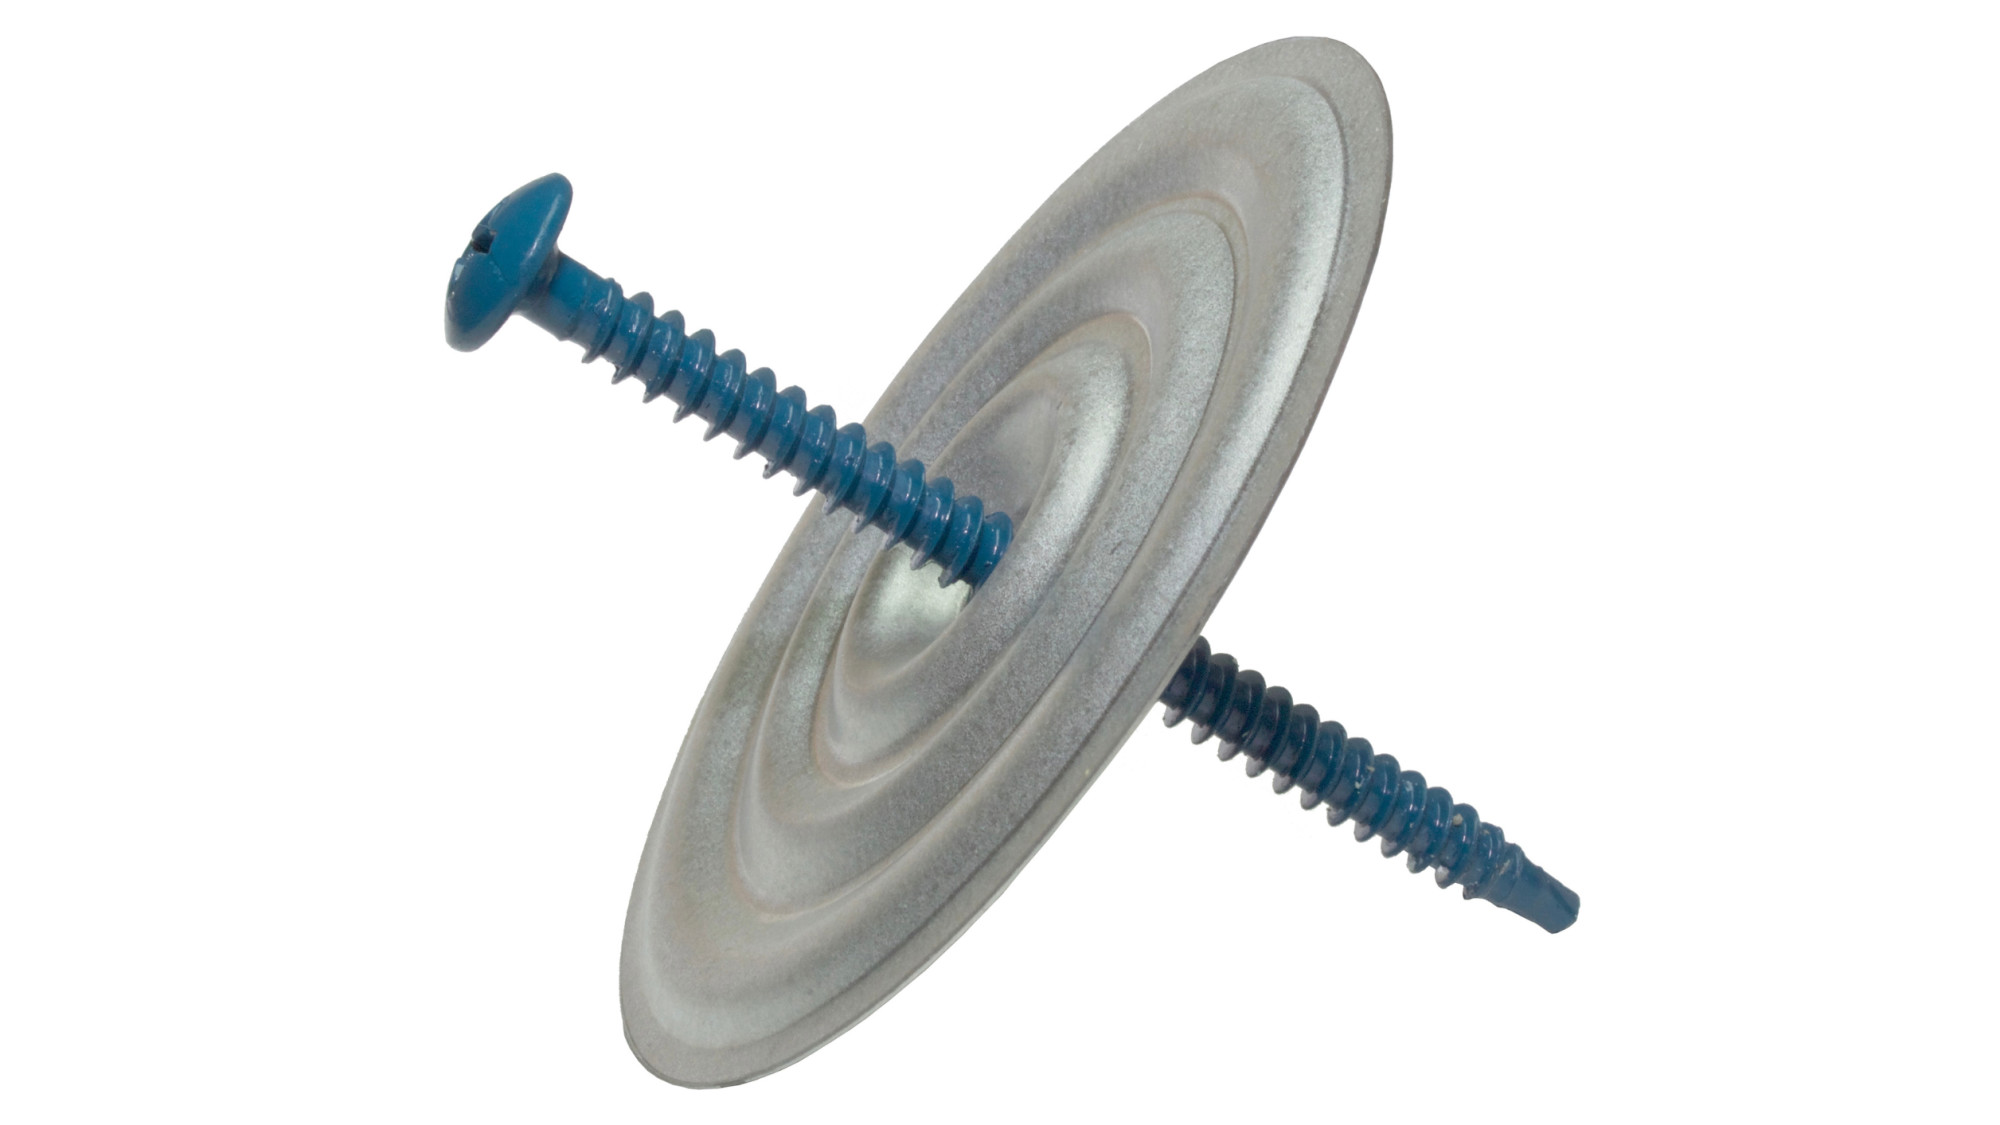 UltraFast Fasteners and Plates